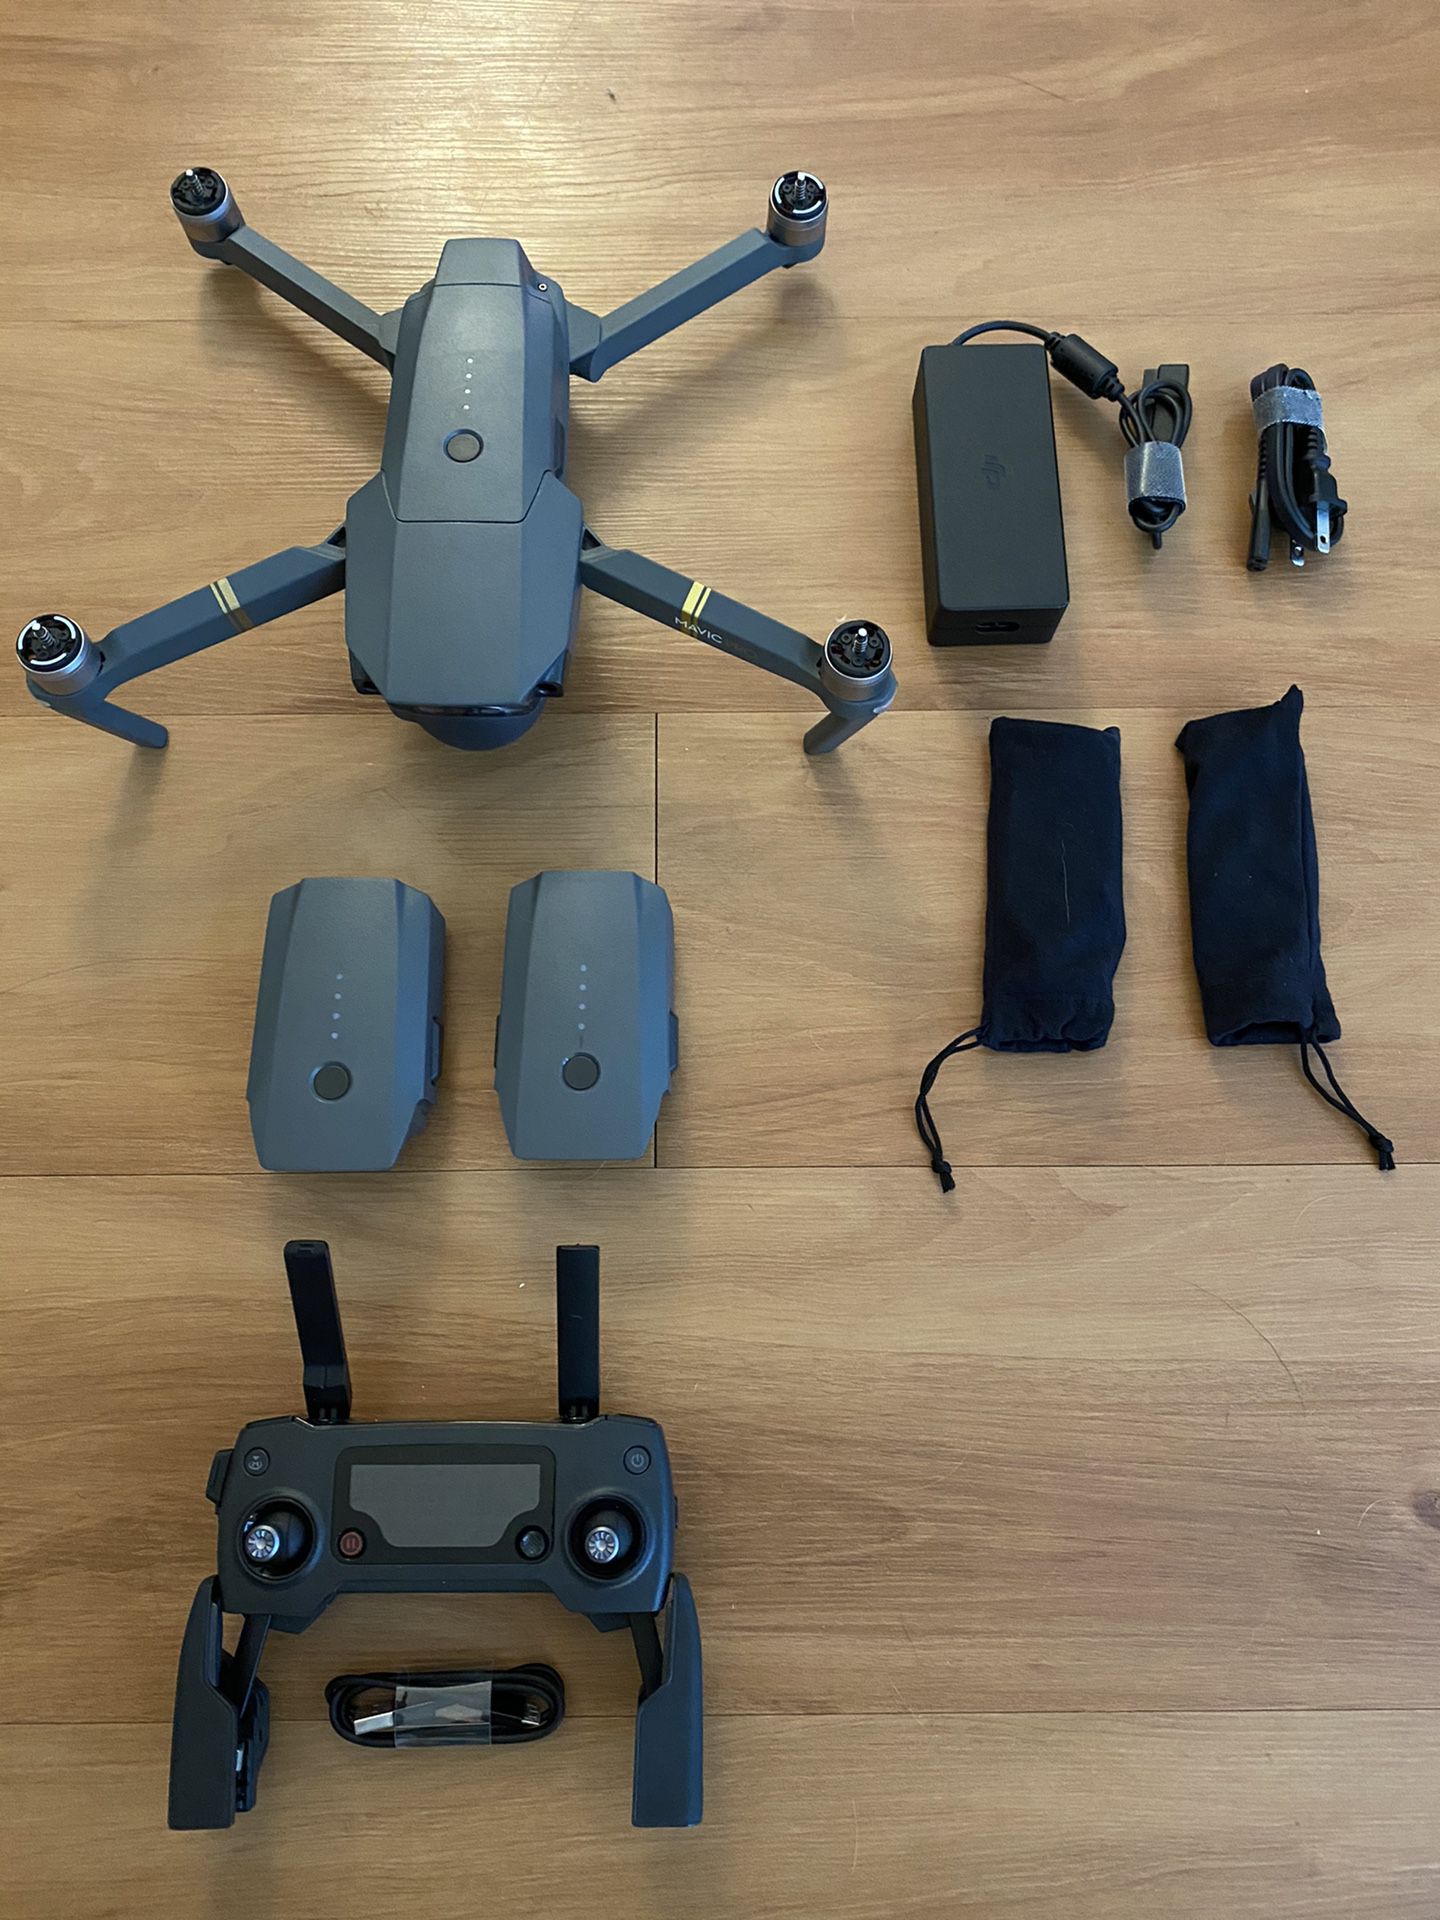 Mavic Pro Drone with 3 batteries, a pro controller, and travel case!!